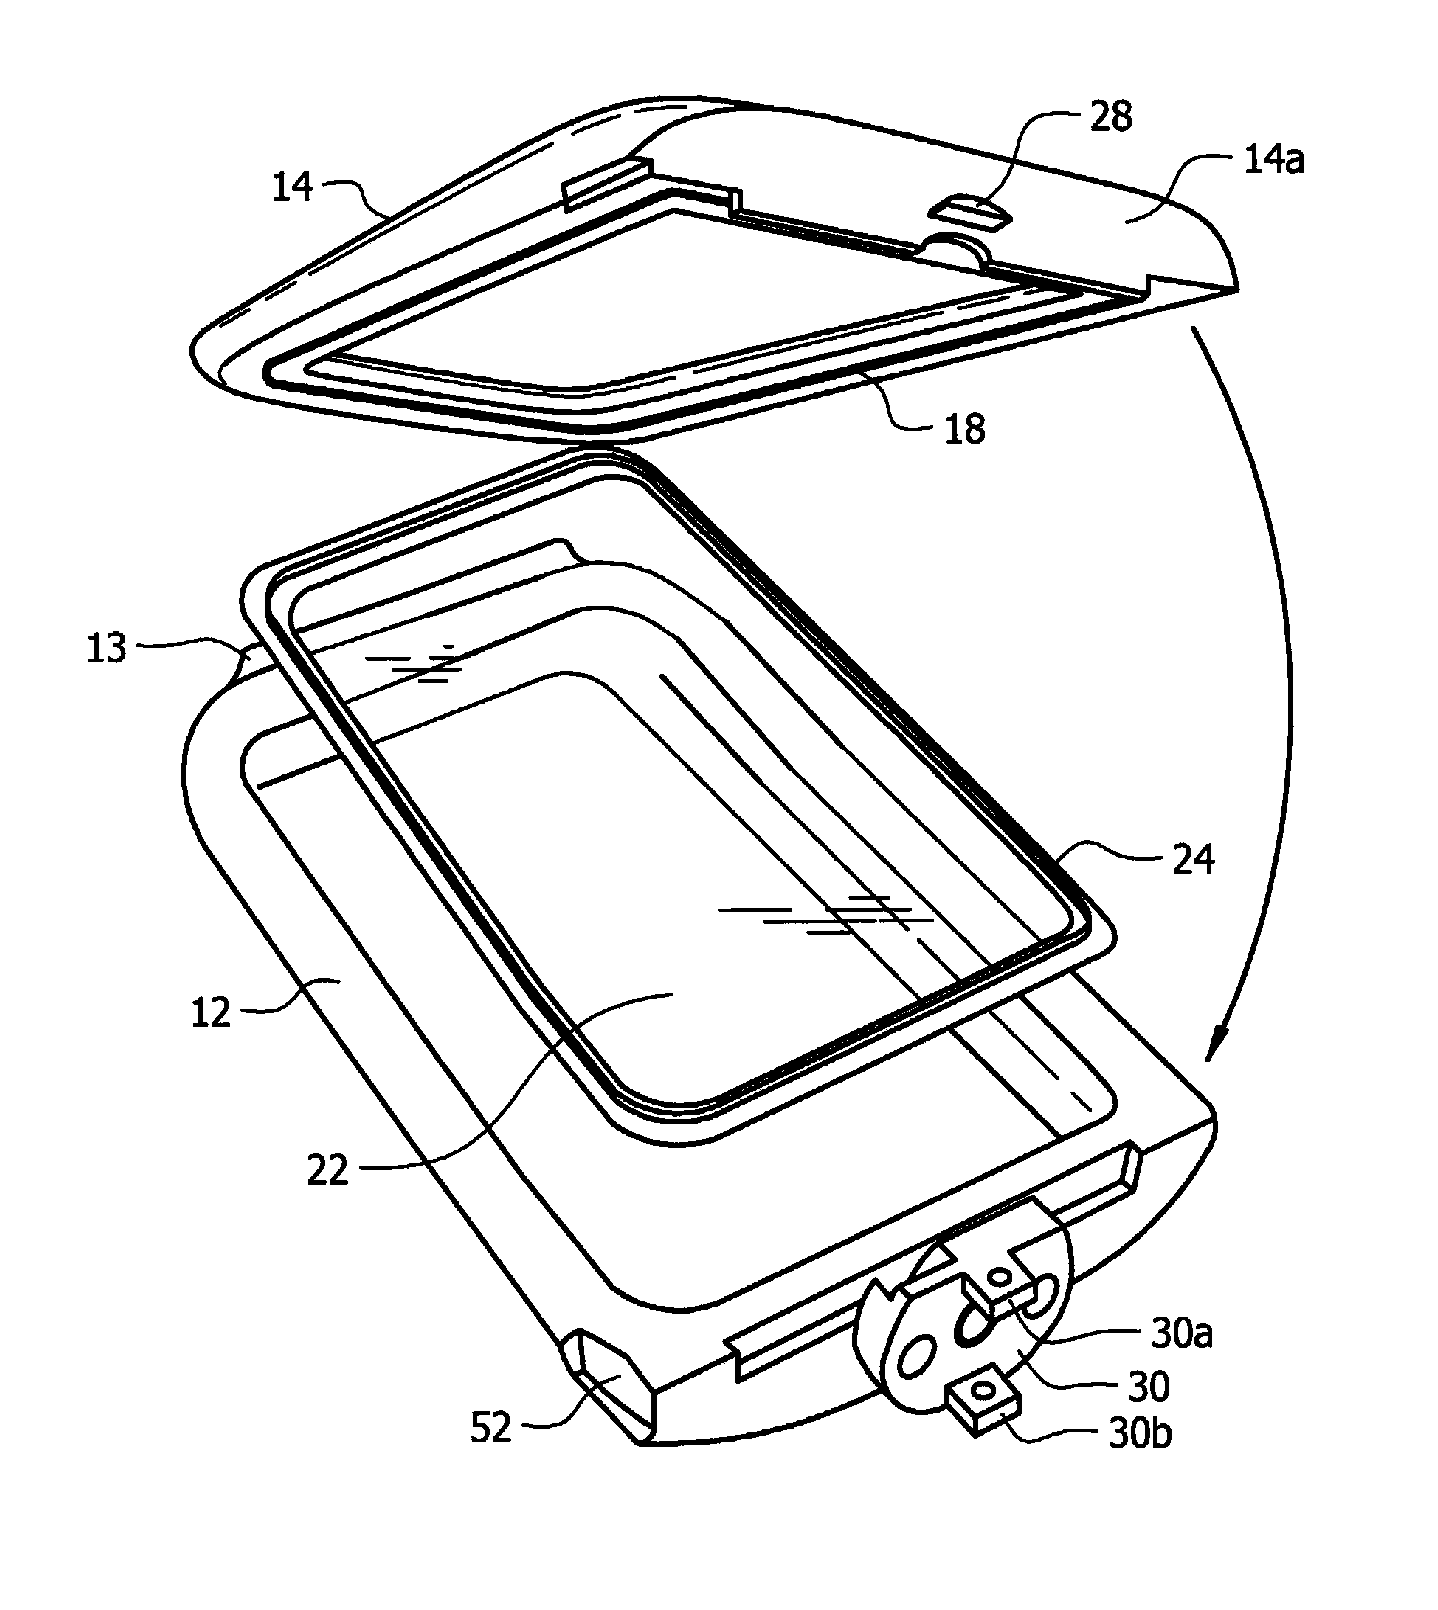 Protective cover for communication device